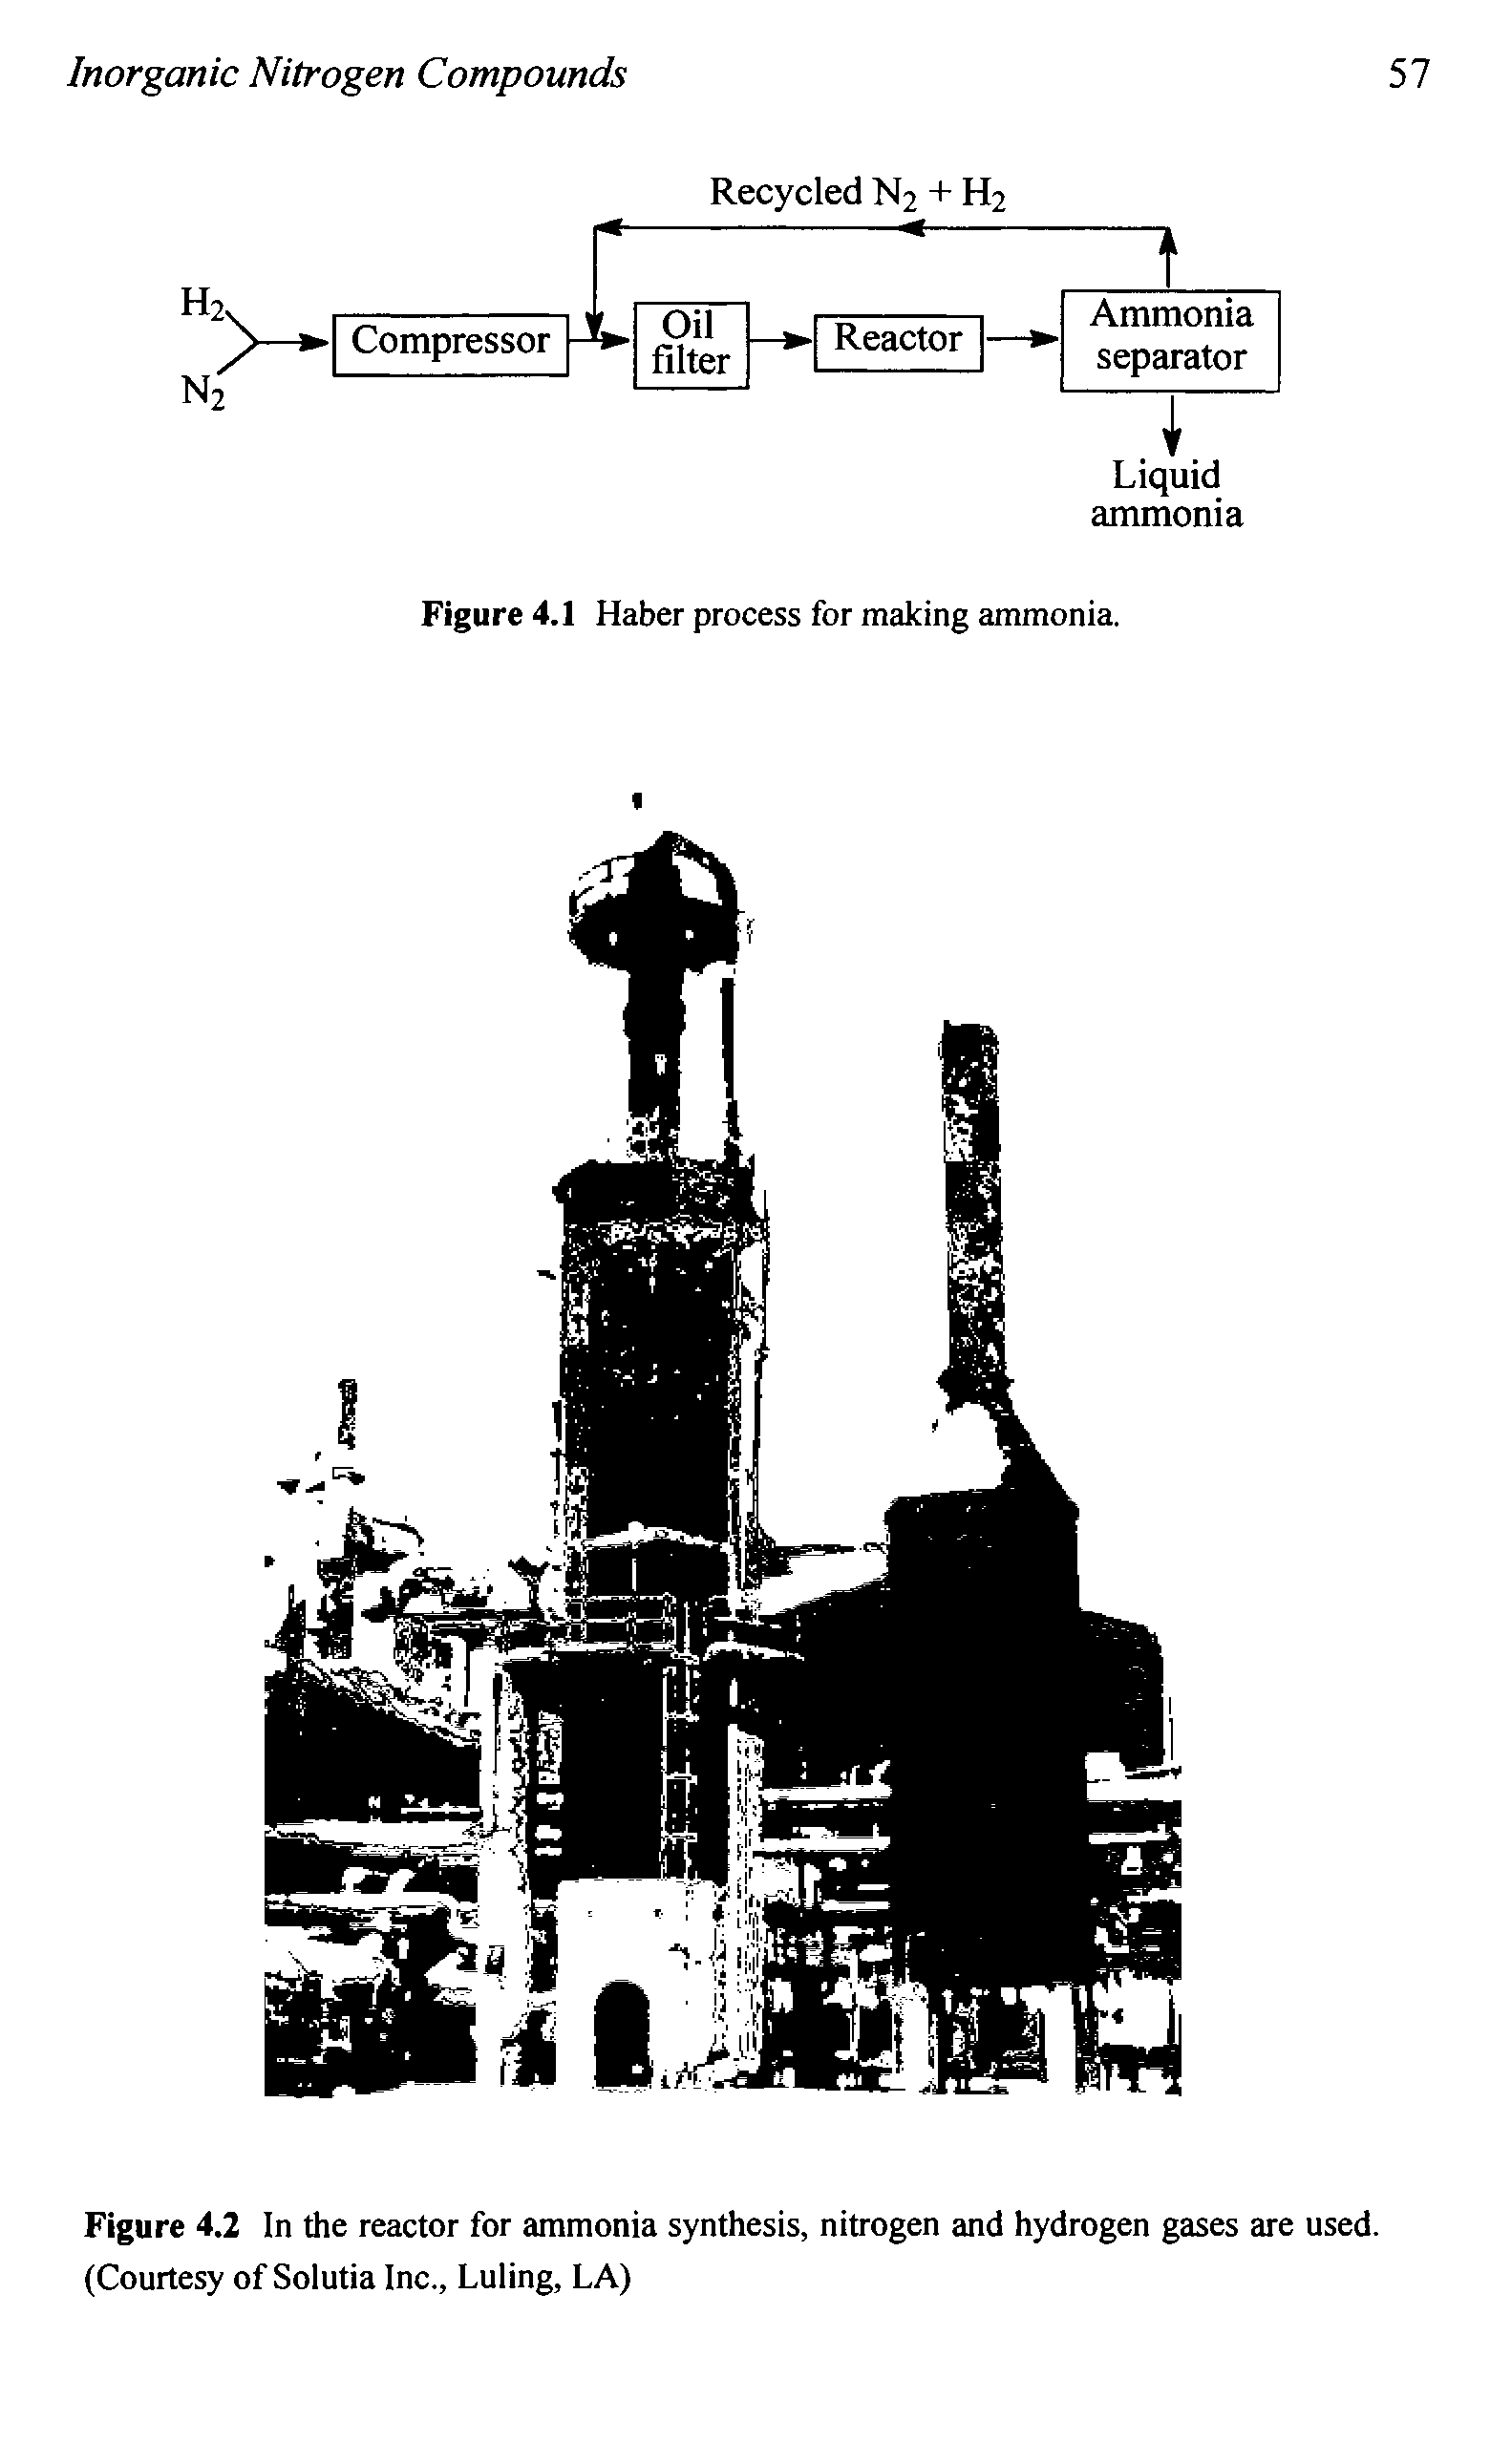 Figure 4.2 In the reactor for ammonia synthesis, nitrogen and hydrogen gases are used. (Courtesy of Solutia Inc., Luling, LA)...